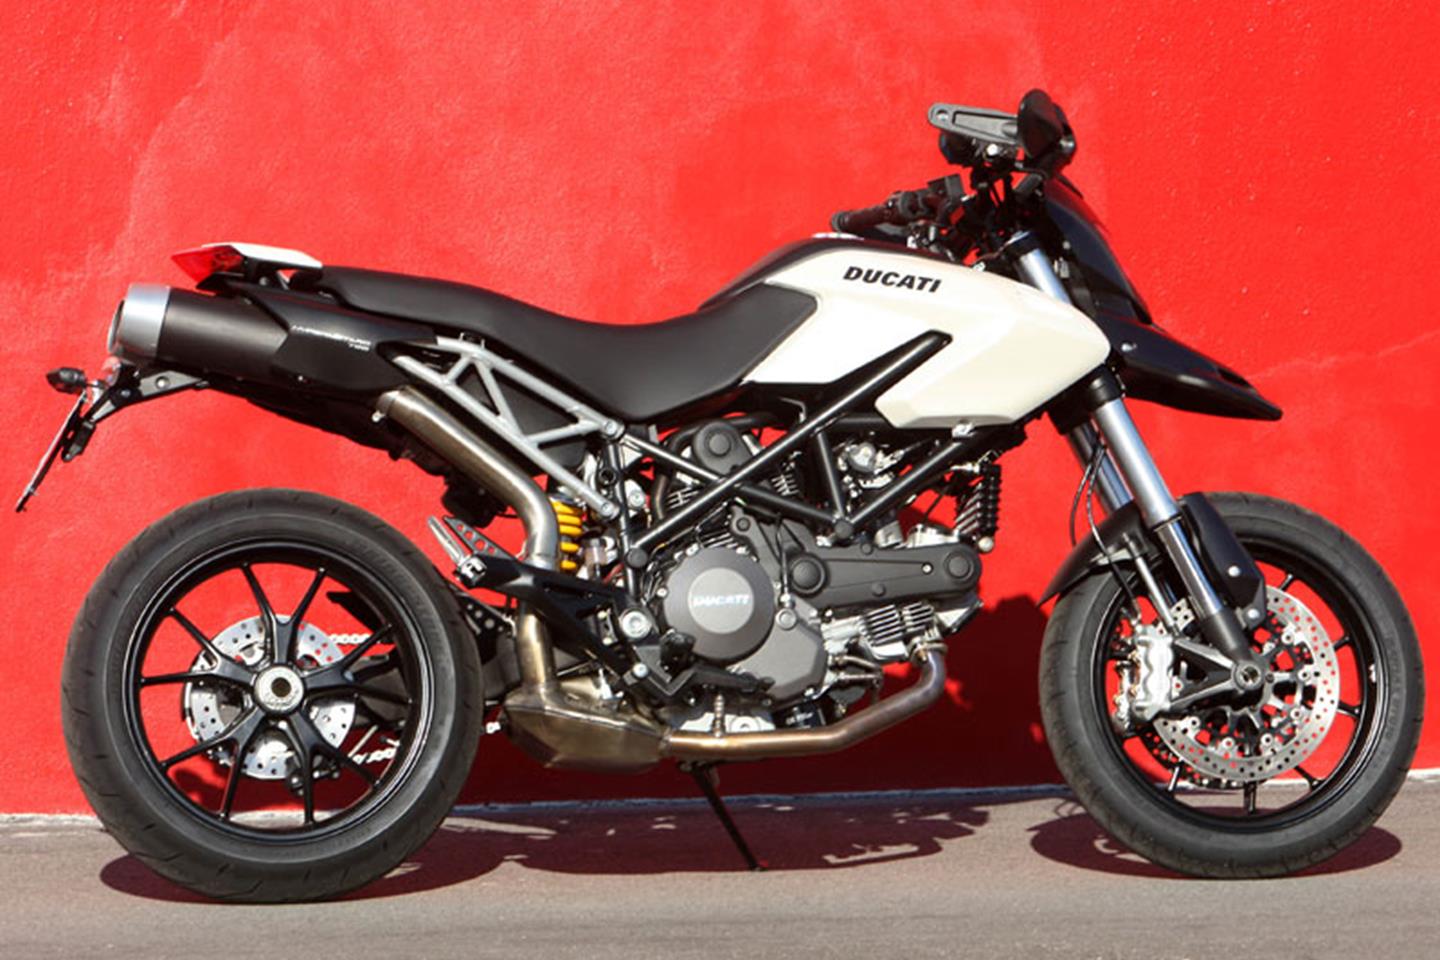 DUCATI HYPERMOTARD 796 (2009-2012) Motorcycle Review